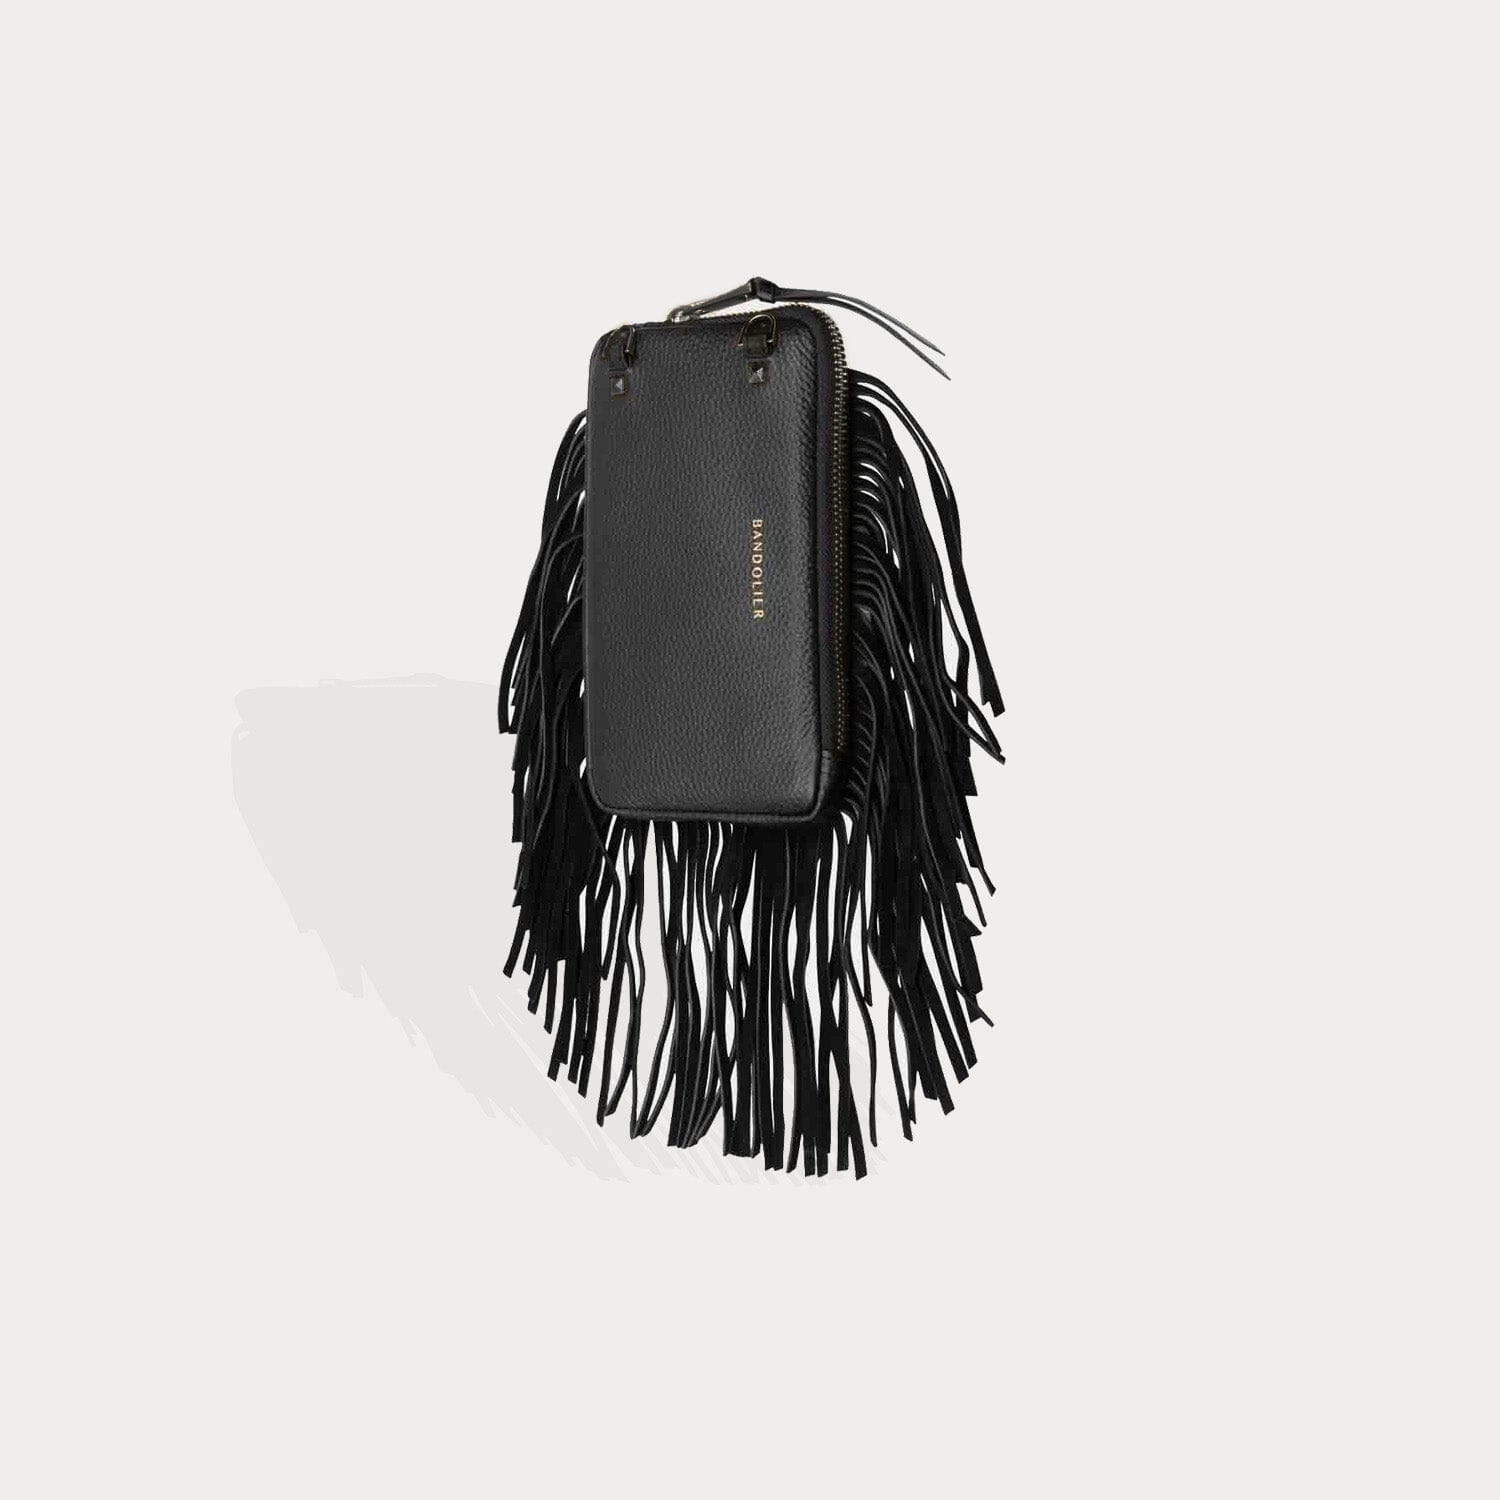 Fringe Expanded Pouch in Greige/Silver | Genuine Leather | Bandolier Style